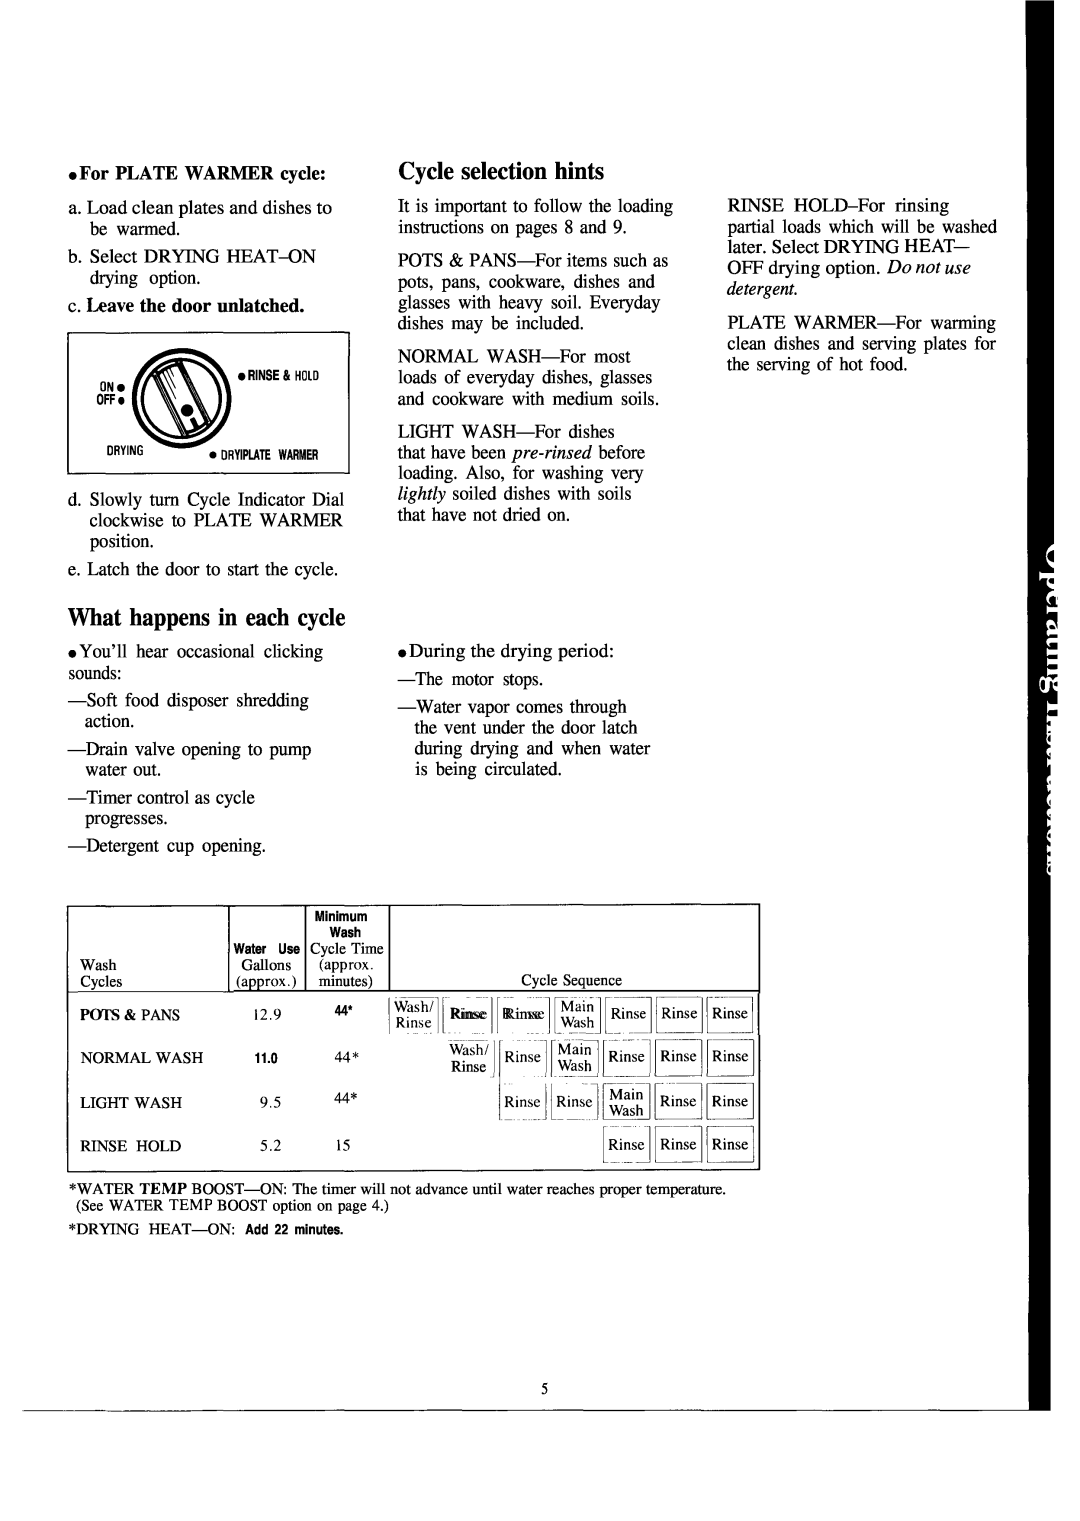 Hotpoint HDA959M Cycle selection hints, What happens in each cycle, lREl..-I”” lEilR~E~E3131, For PLATE WARMER cycle 